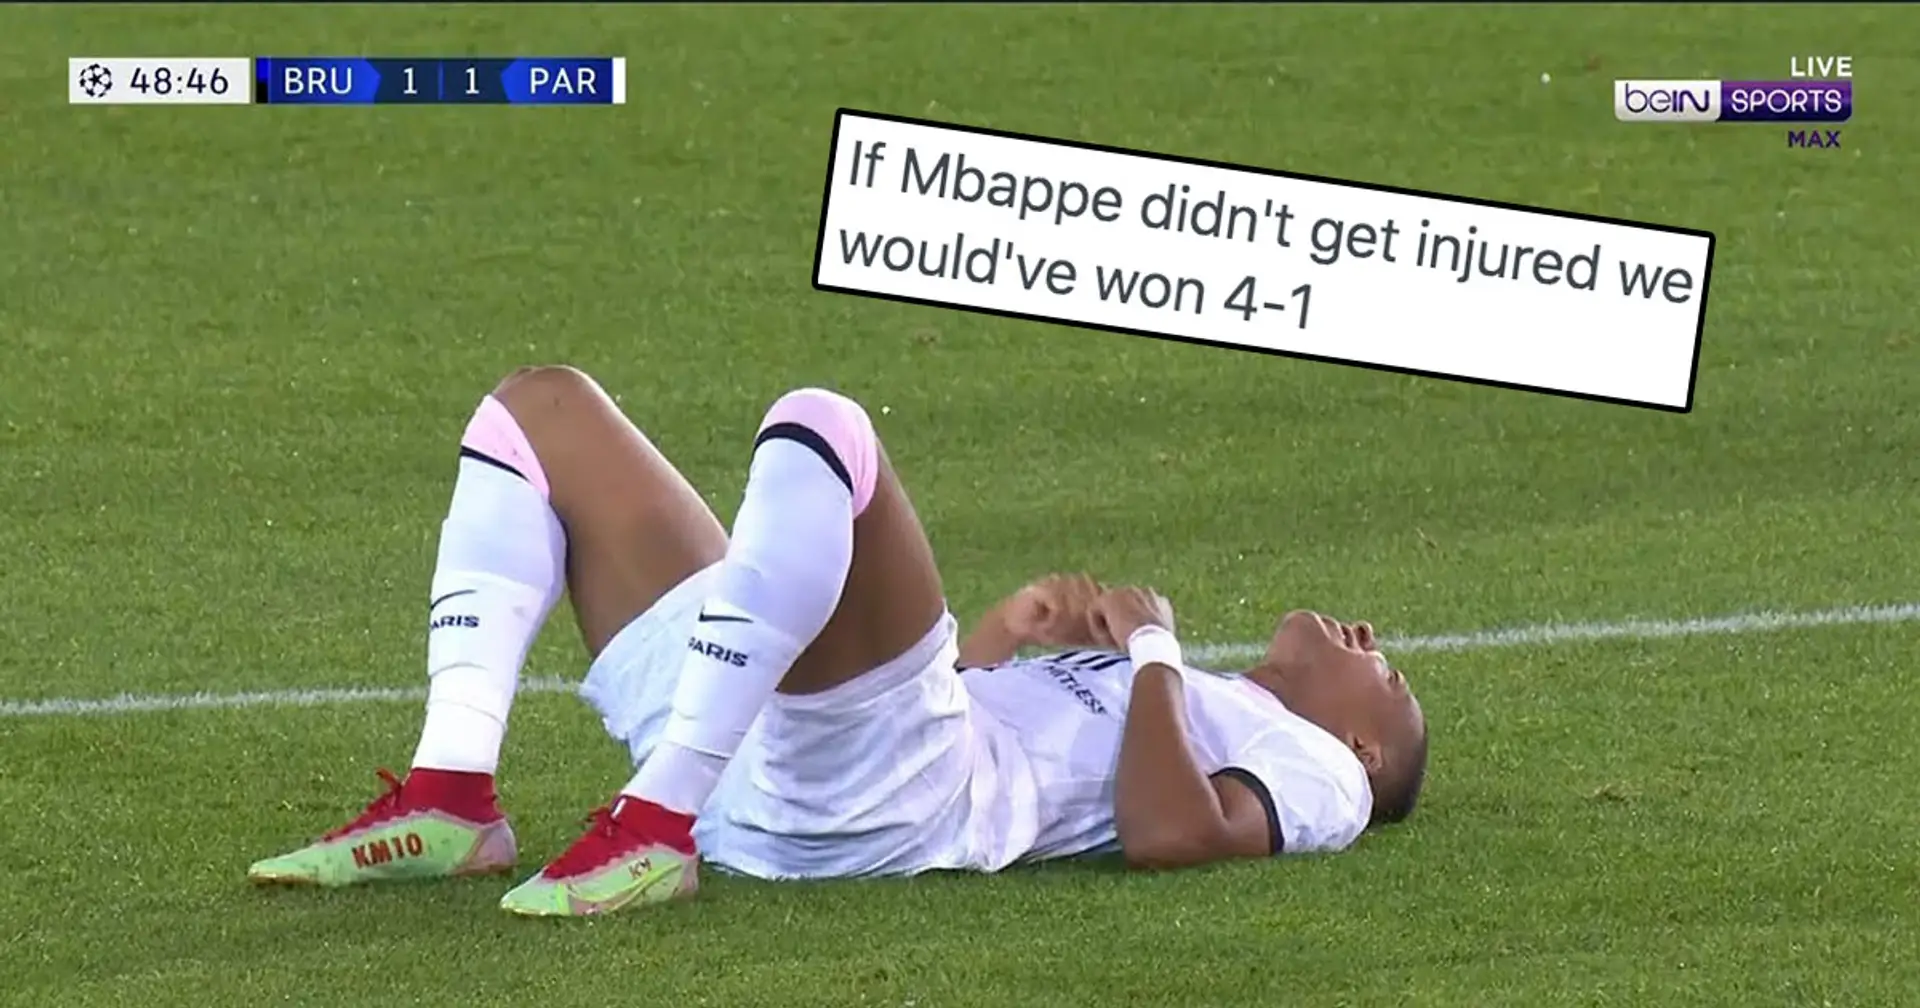 How serious is Mbappe's fresh injury? You asked, we answered